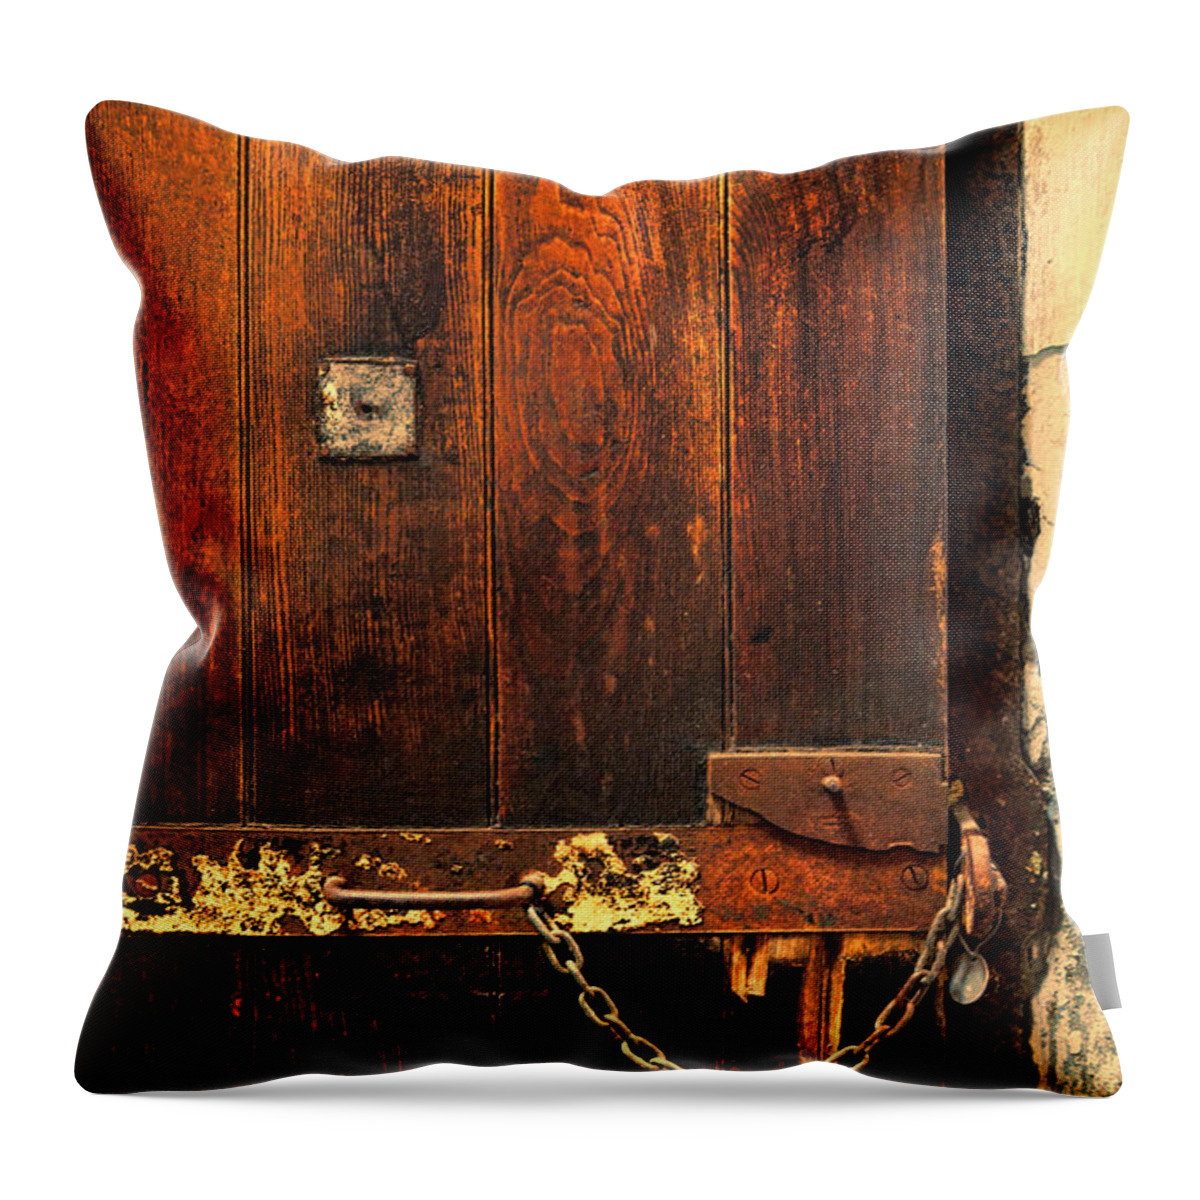 Solitary Throw Pillow featuring the photograph Solitary Confinement Door by Jill Battaglia